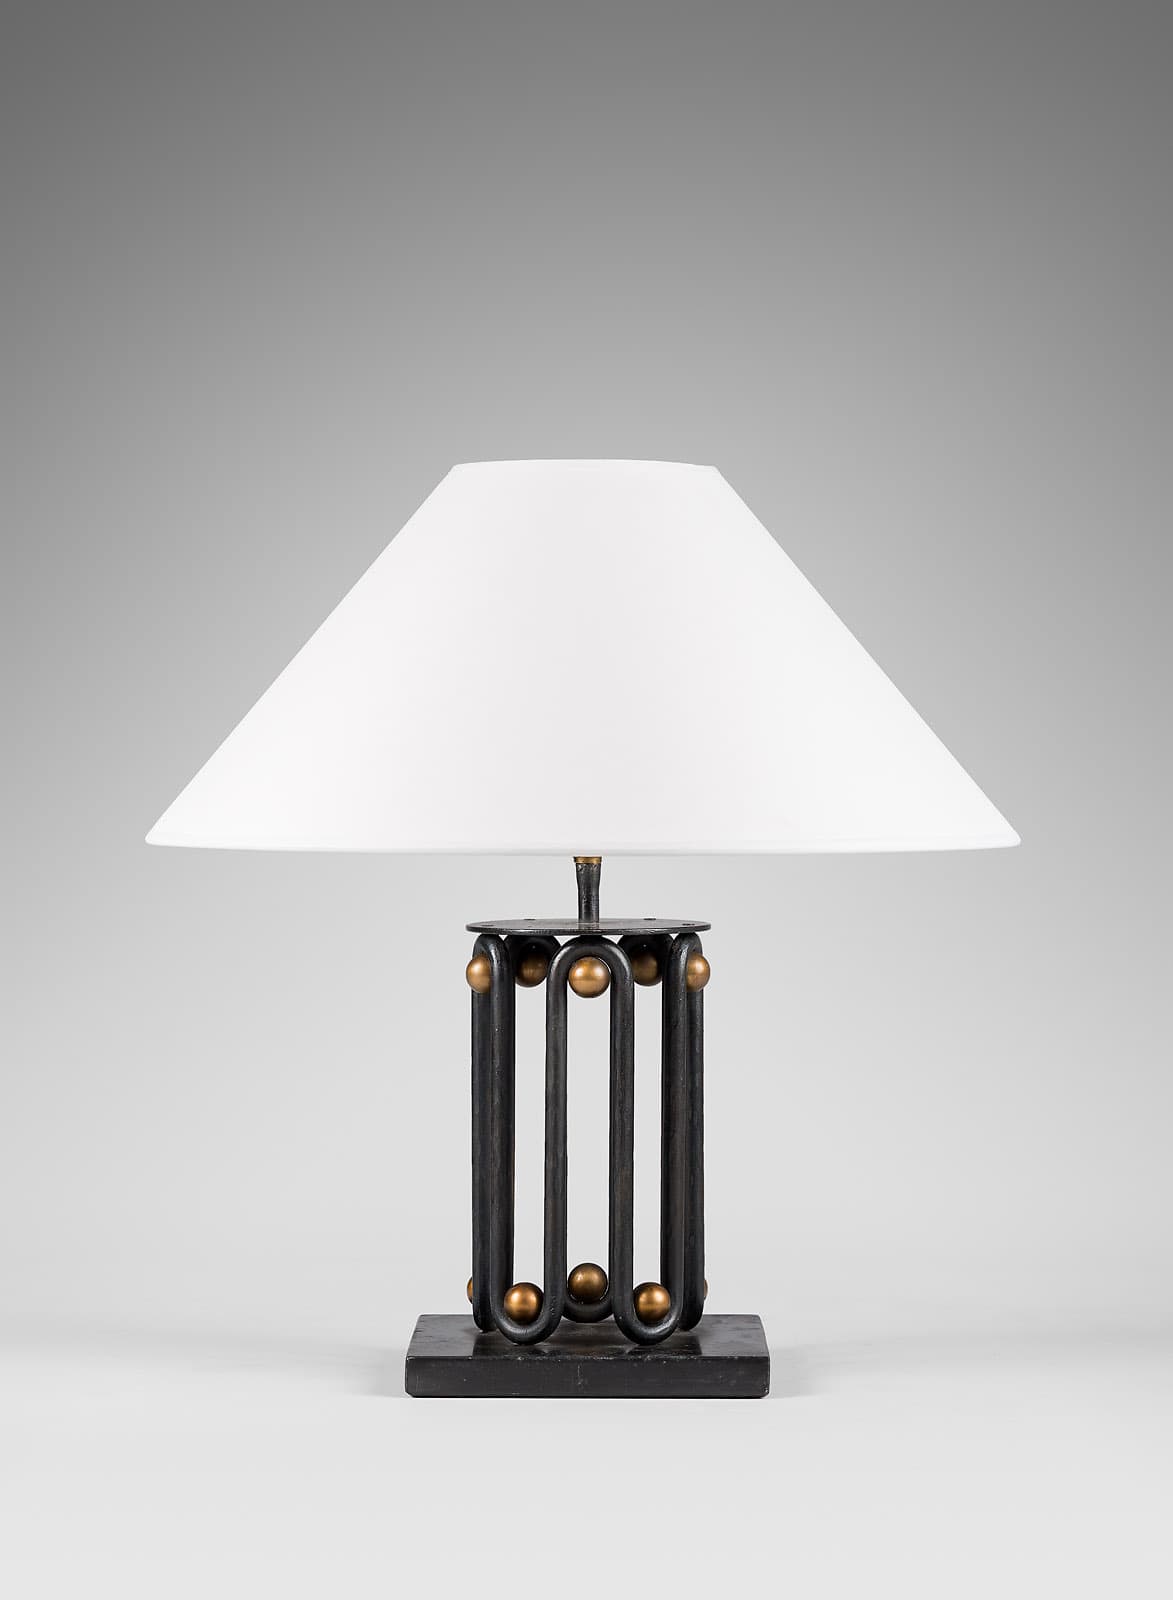 Jean Royère, “Ondulation” table lamp (sold), vue 01